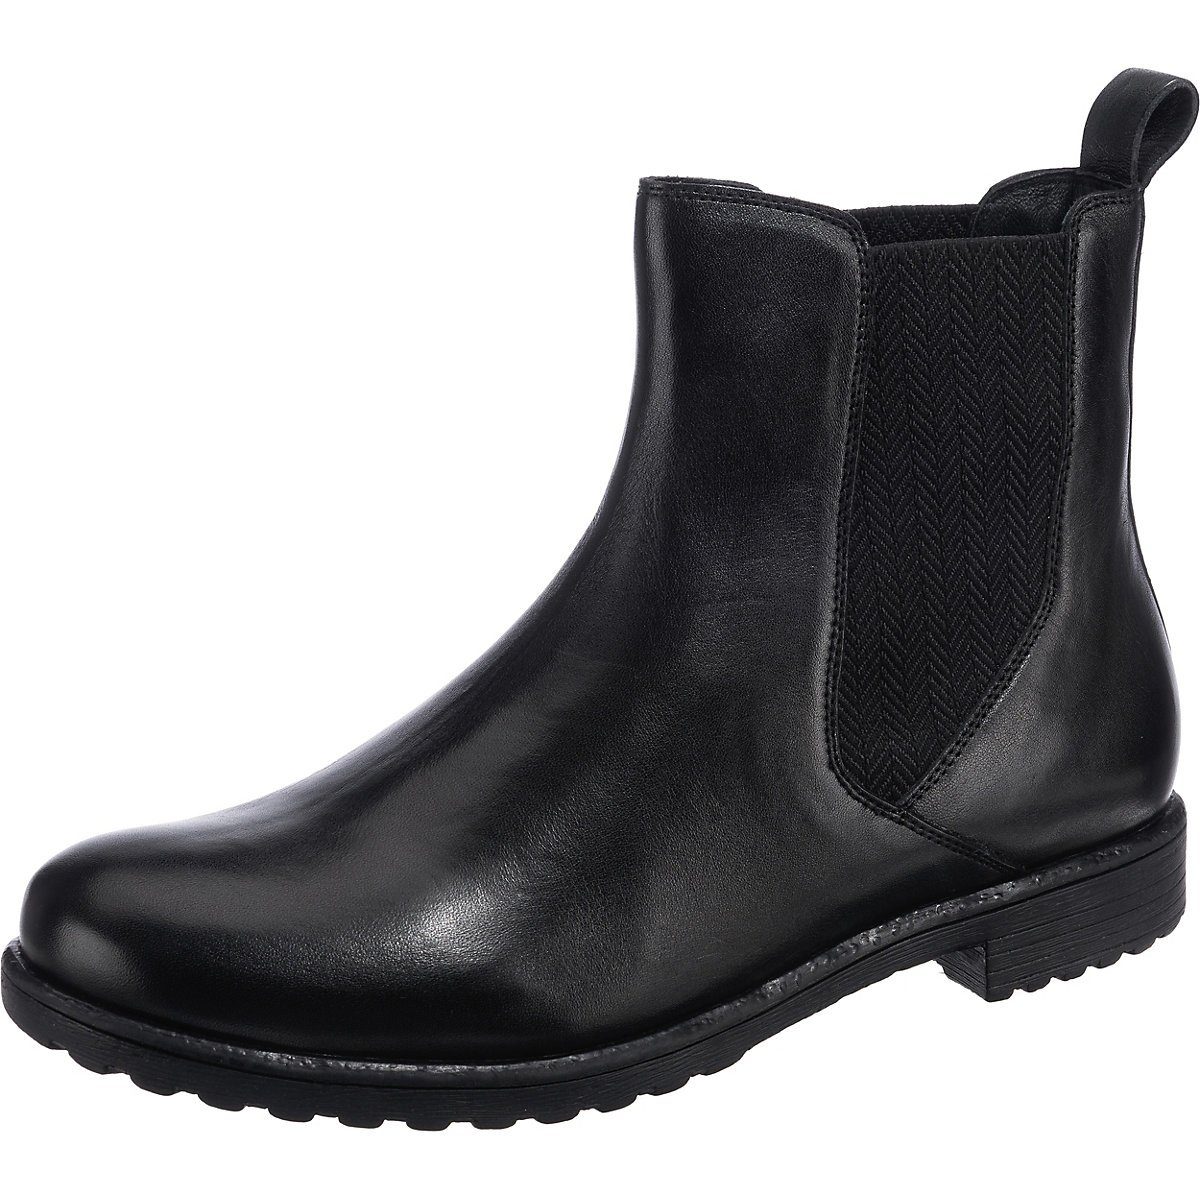 Ara Liverpool Chelsea Boots Chelseaboots